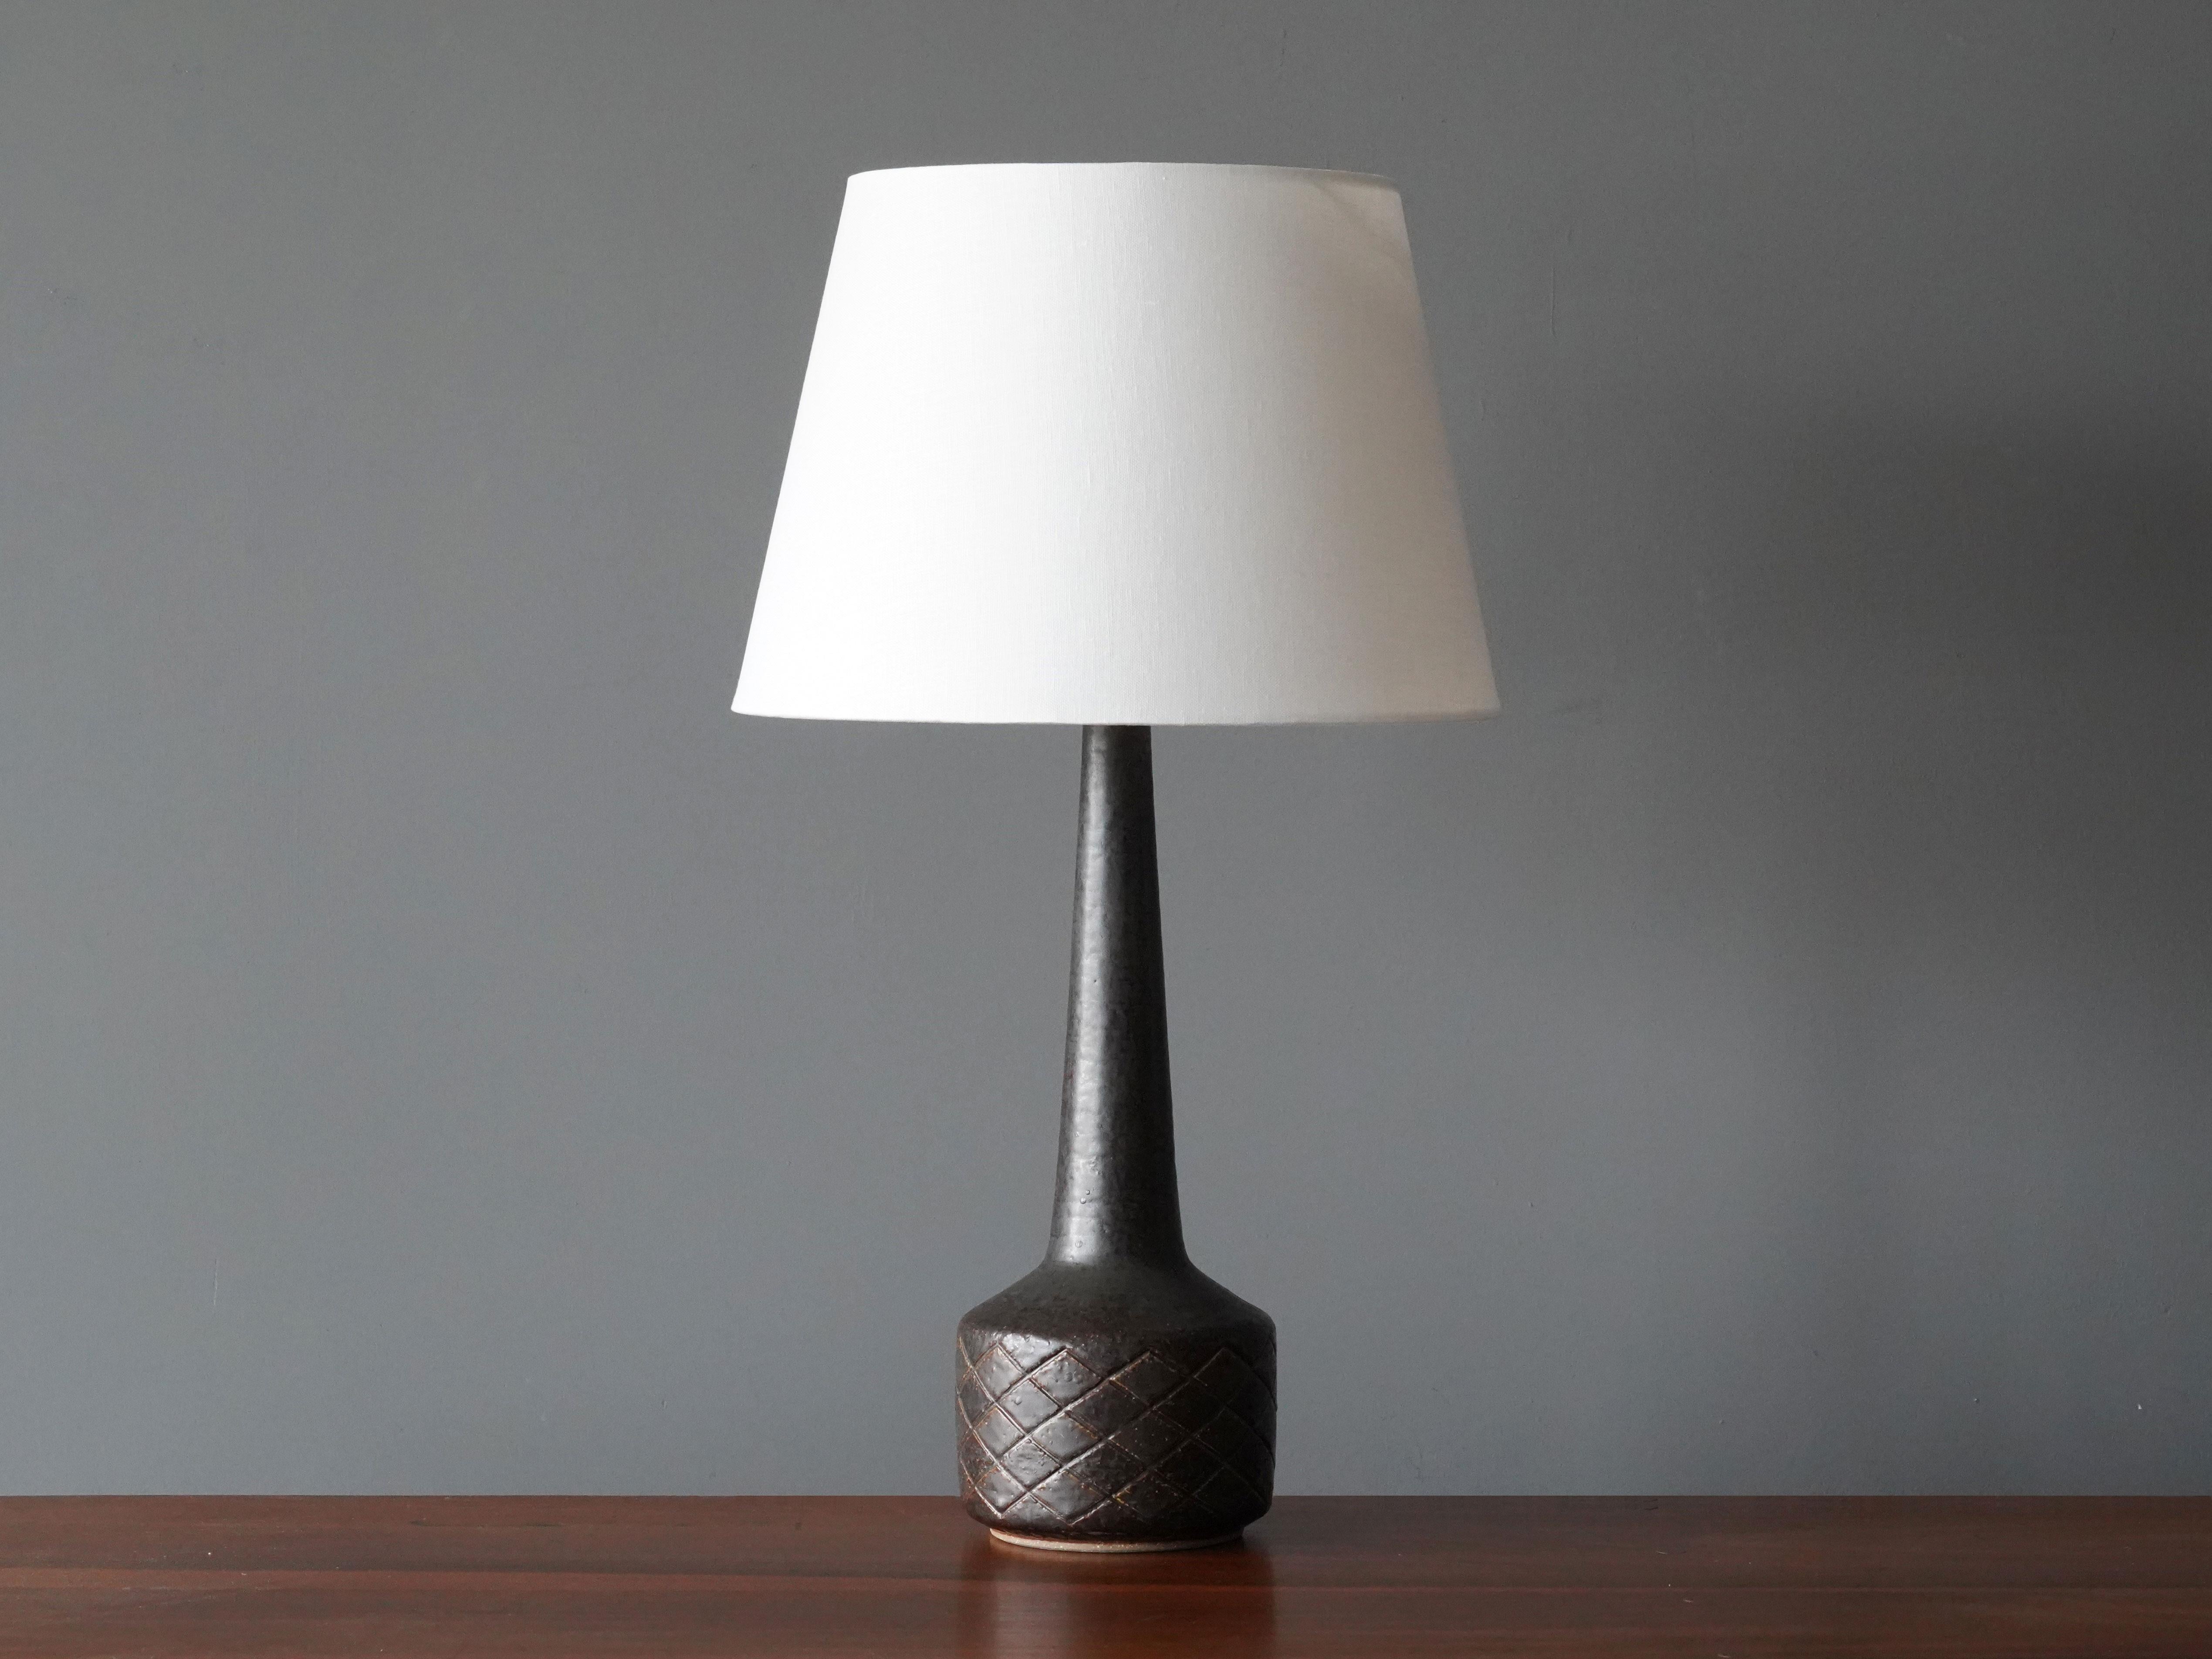 A table / desk lamp designed by husband and wife Per & Annelise Linneman-Schmidt. Handcast in firesand, each lamp with a unique glaze. Produced in their own Studio, named Palshus, in Sengeløse, Denmark. Signed

This lamp of early production,